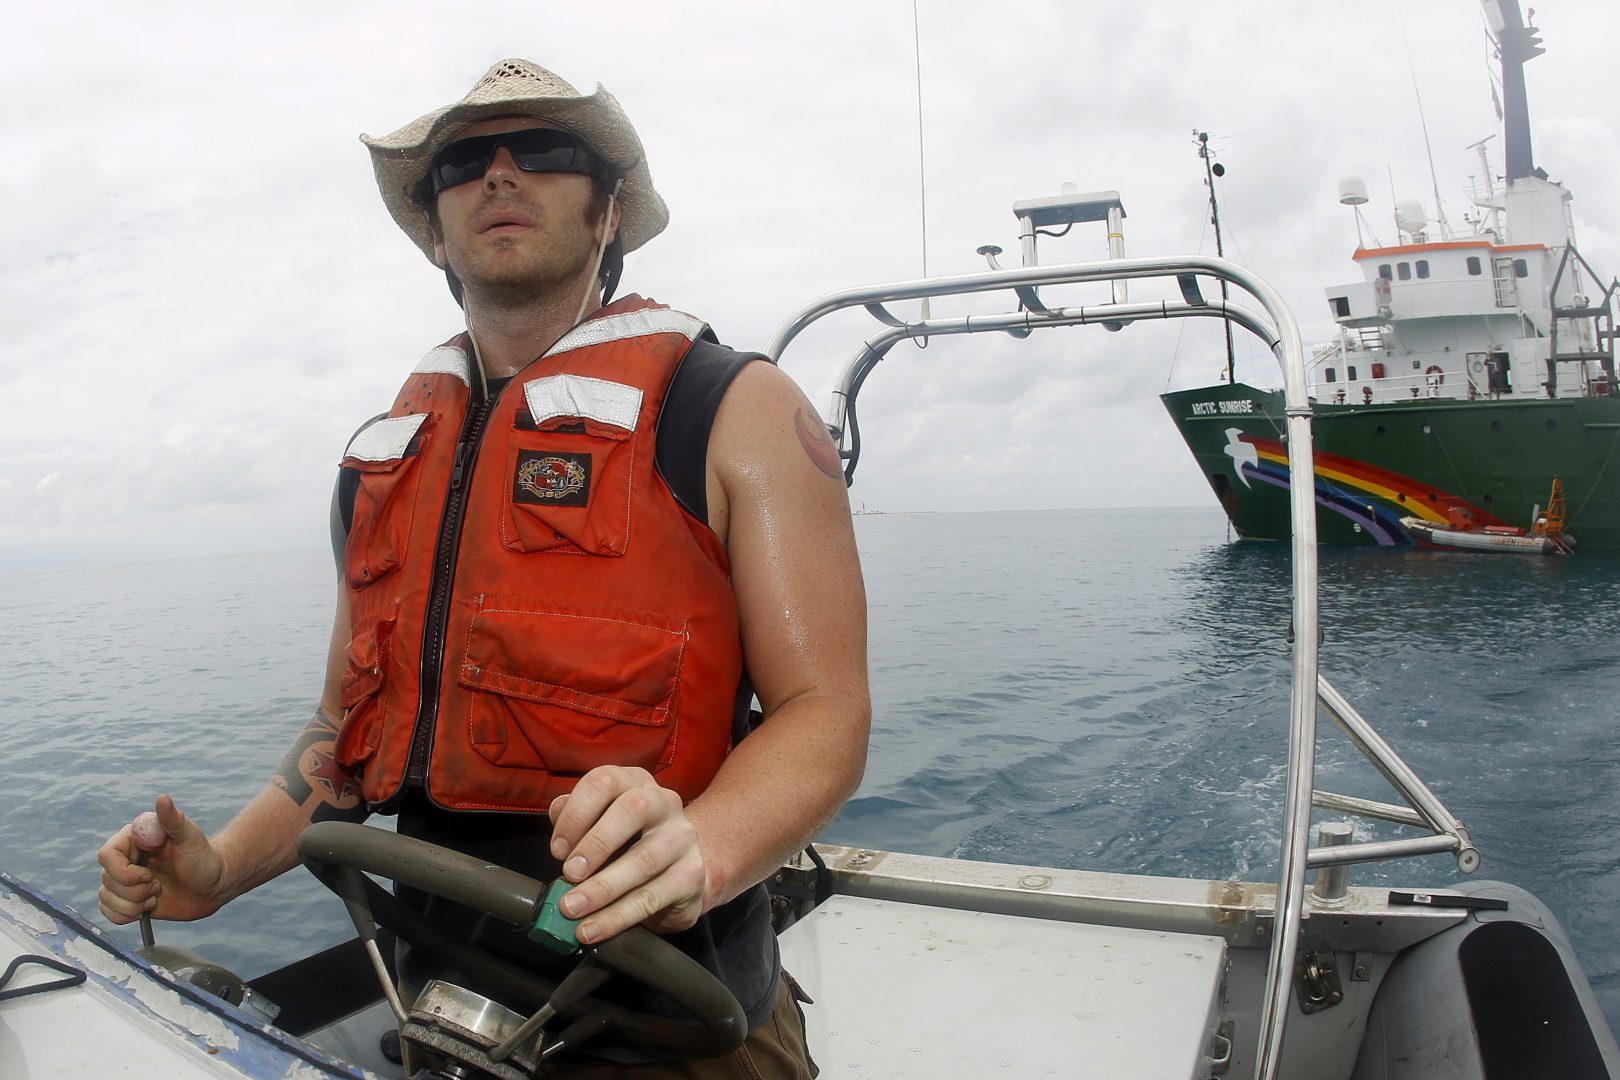 Greenpeace actions co-ordinator Shannon lo Ricco on a research expedition in the Gulf of Mexico